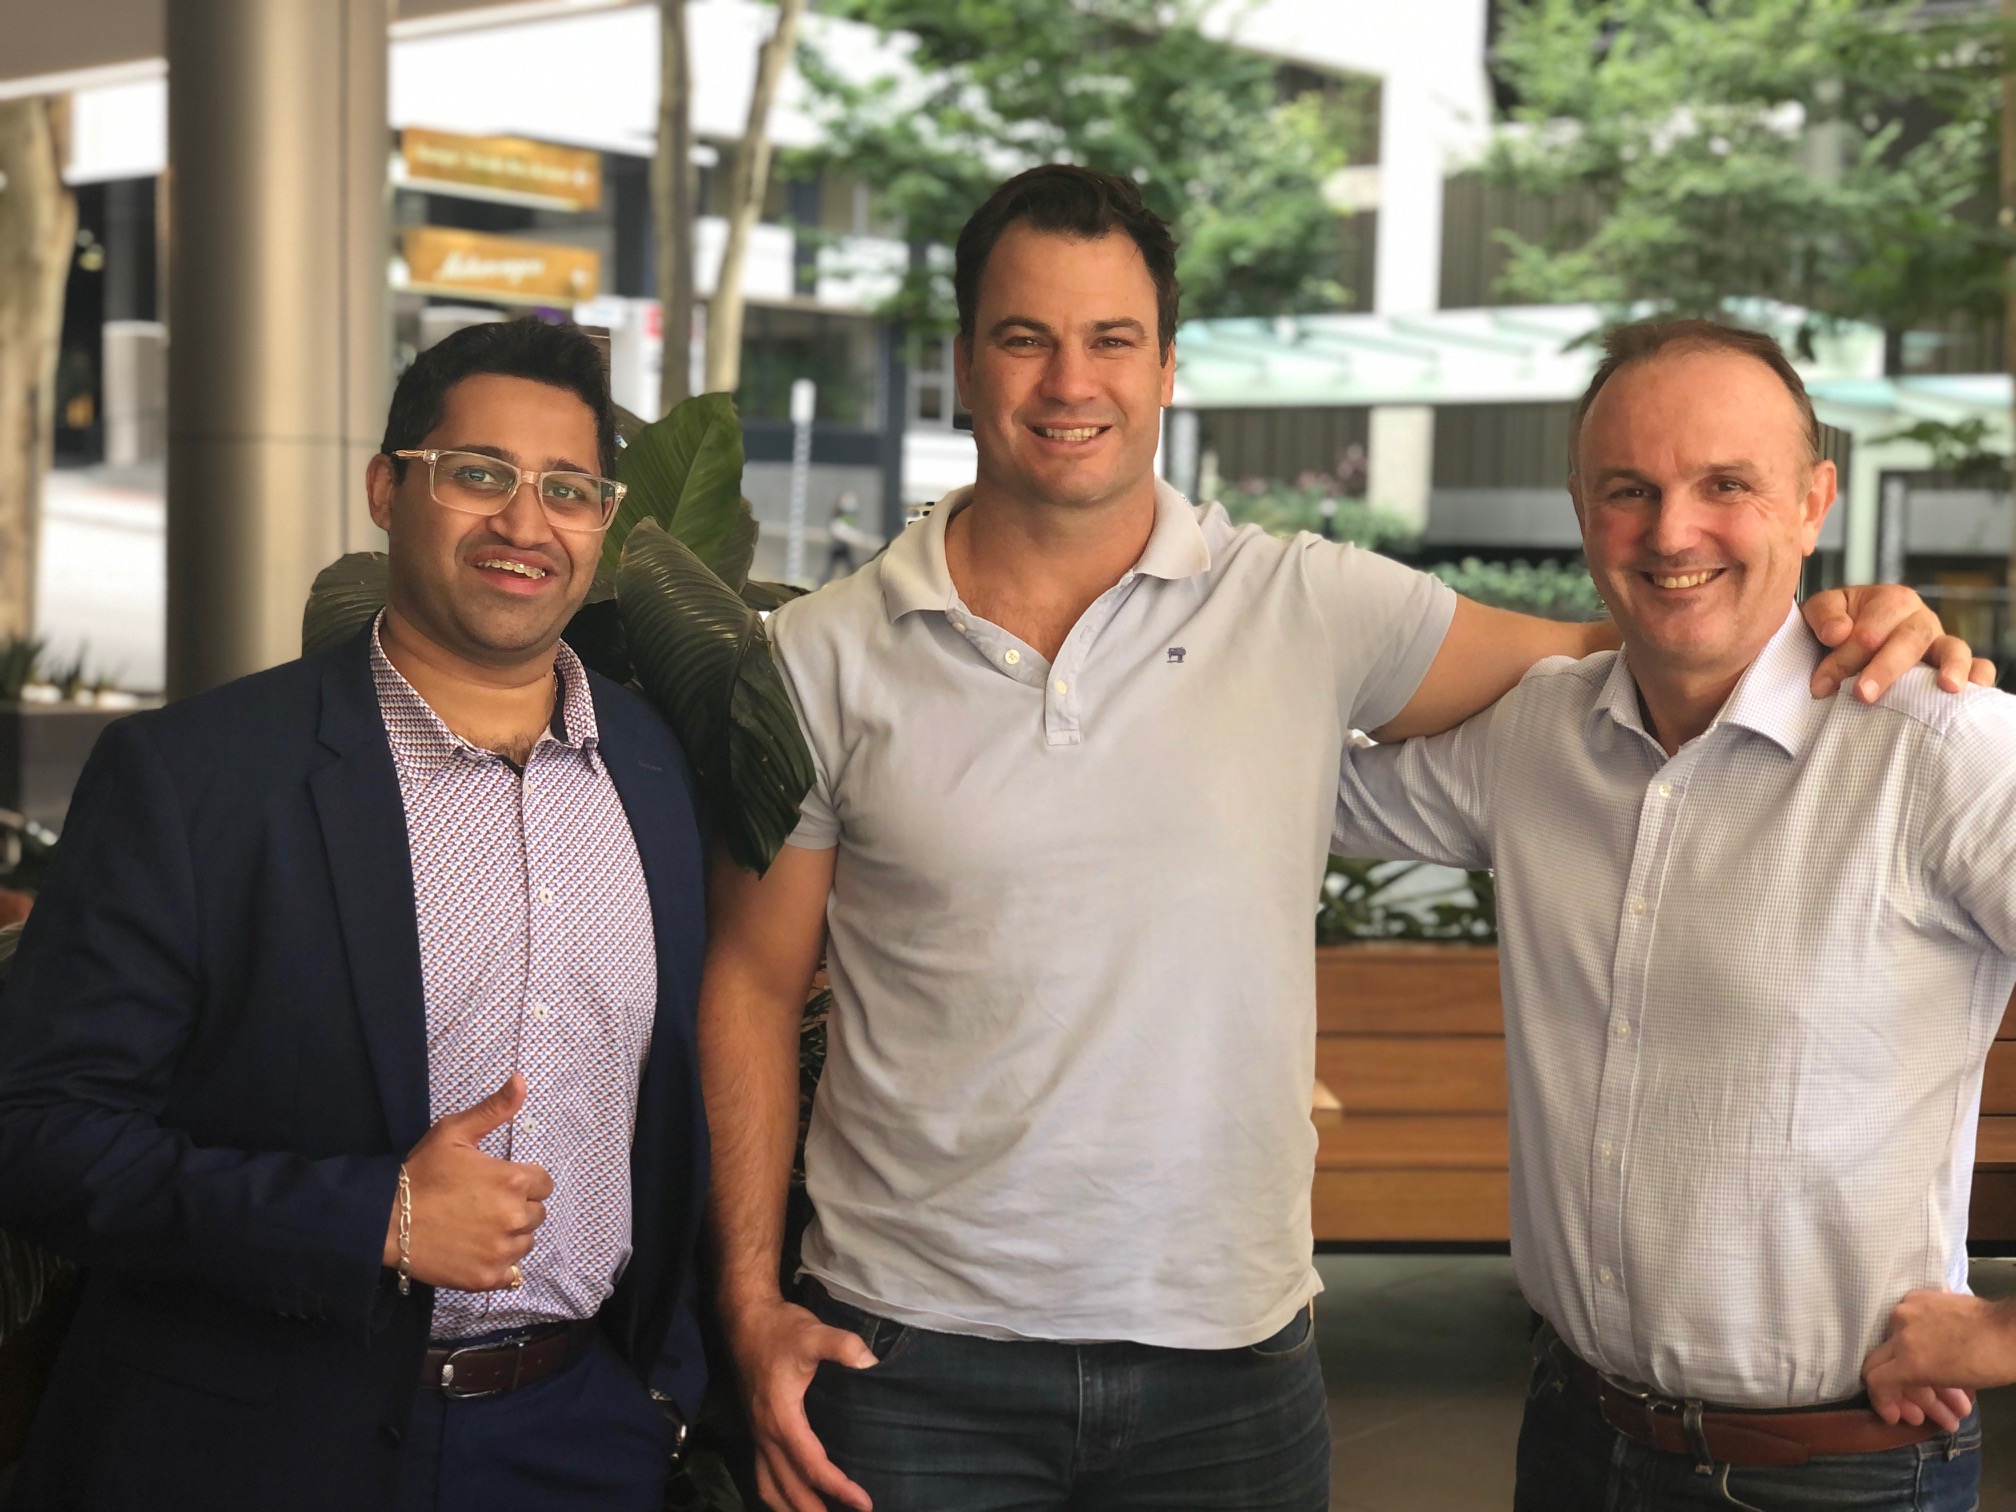 Taher Ali, David Shillington and Brenden Brien celebrating Wellbeing Code coming on board as a client with Win WIn Outcomes